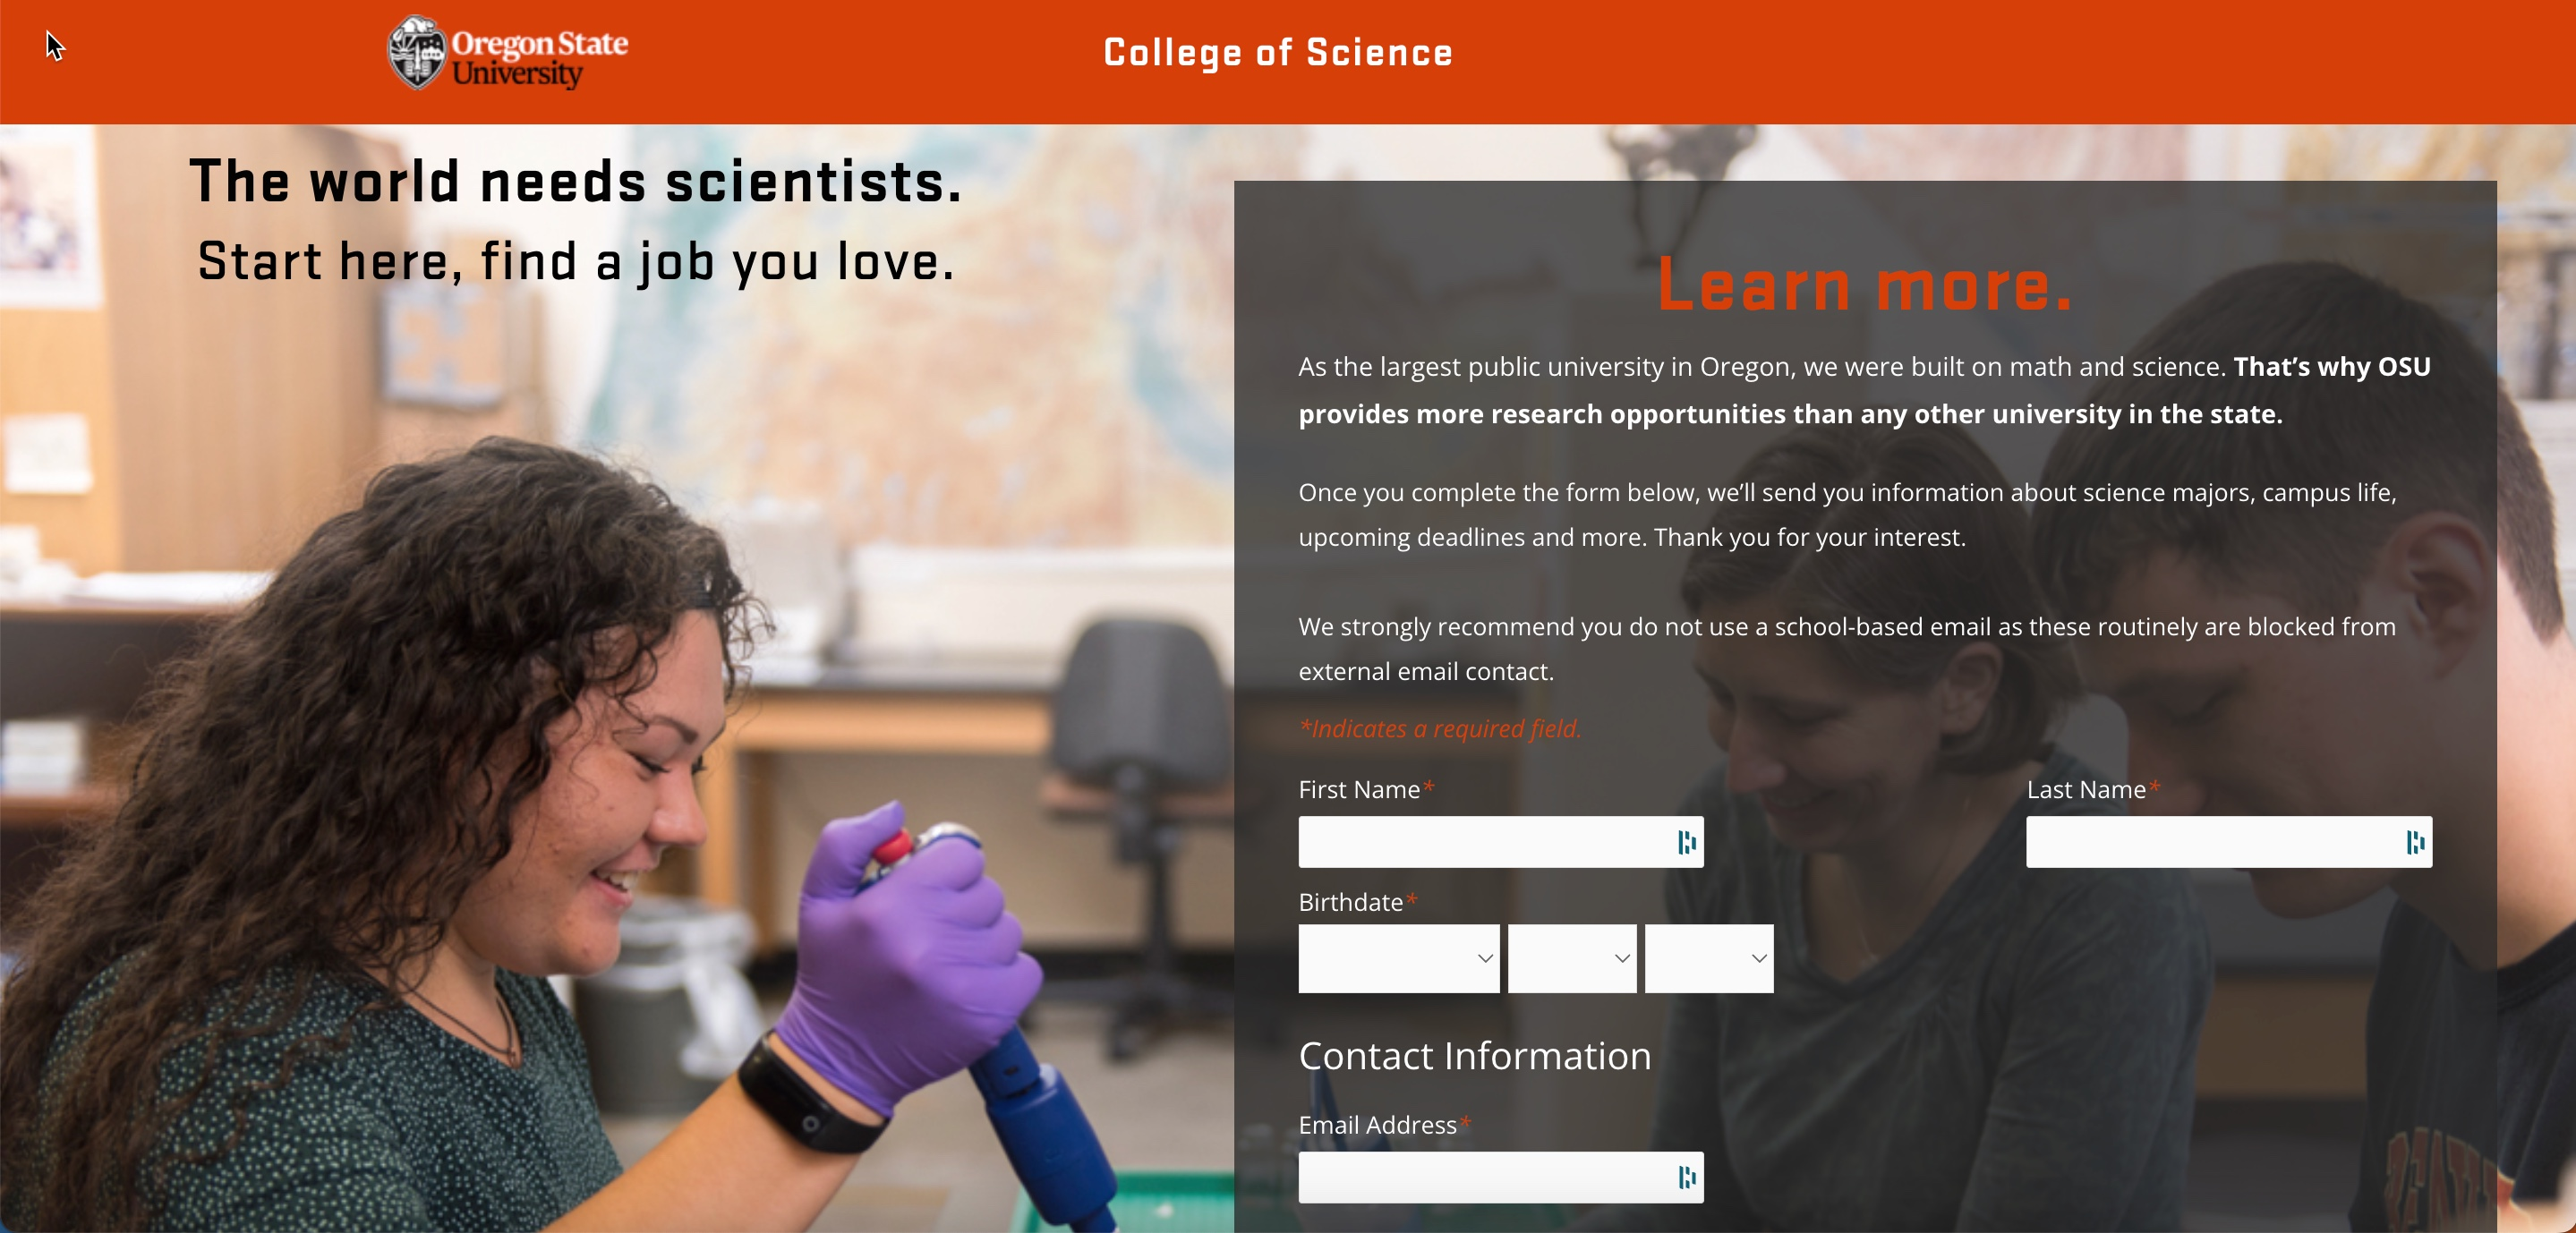 A landing page made by Oregon University where potential candidates can learn more about science degrees and request further information